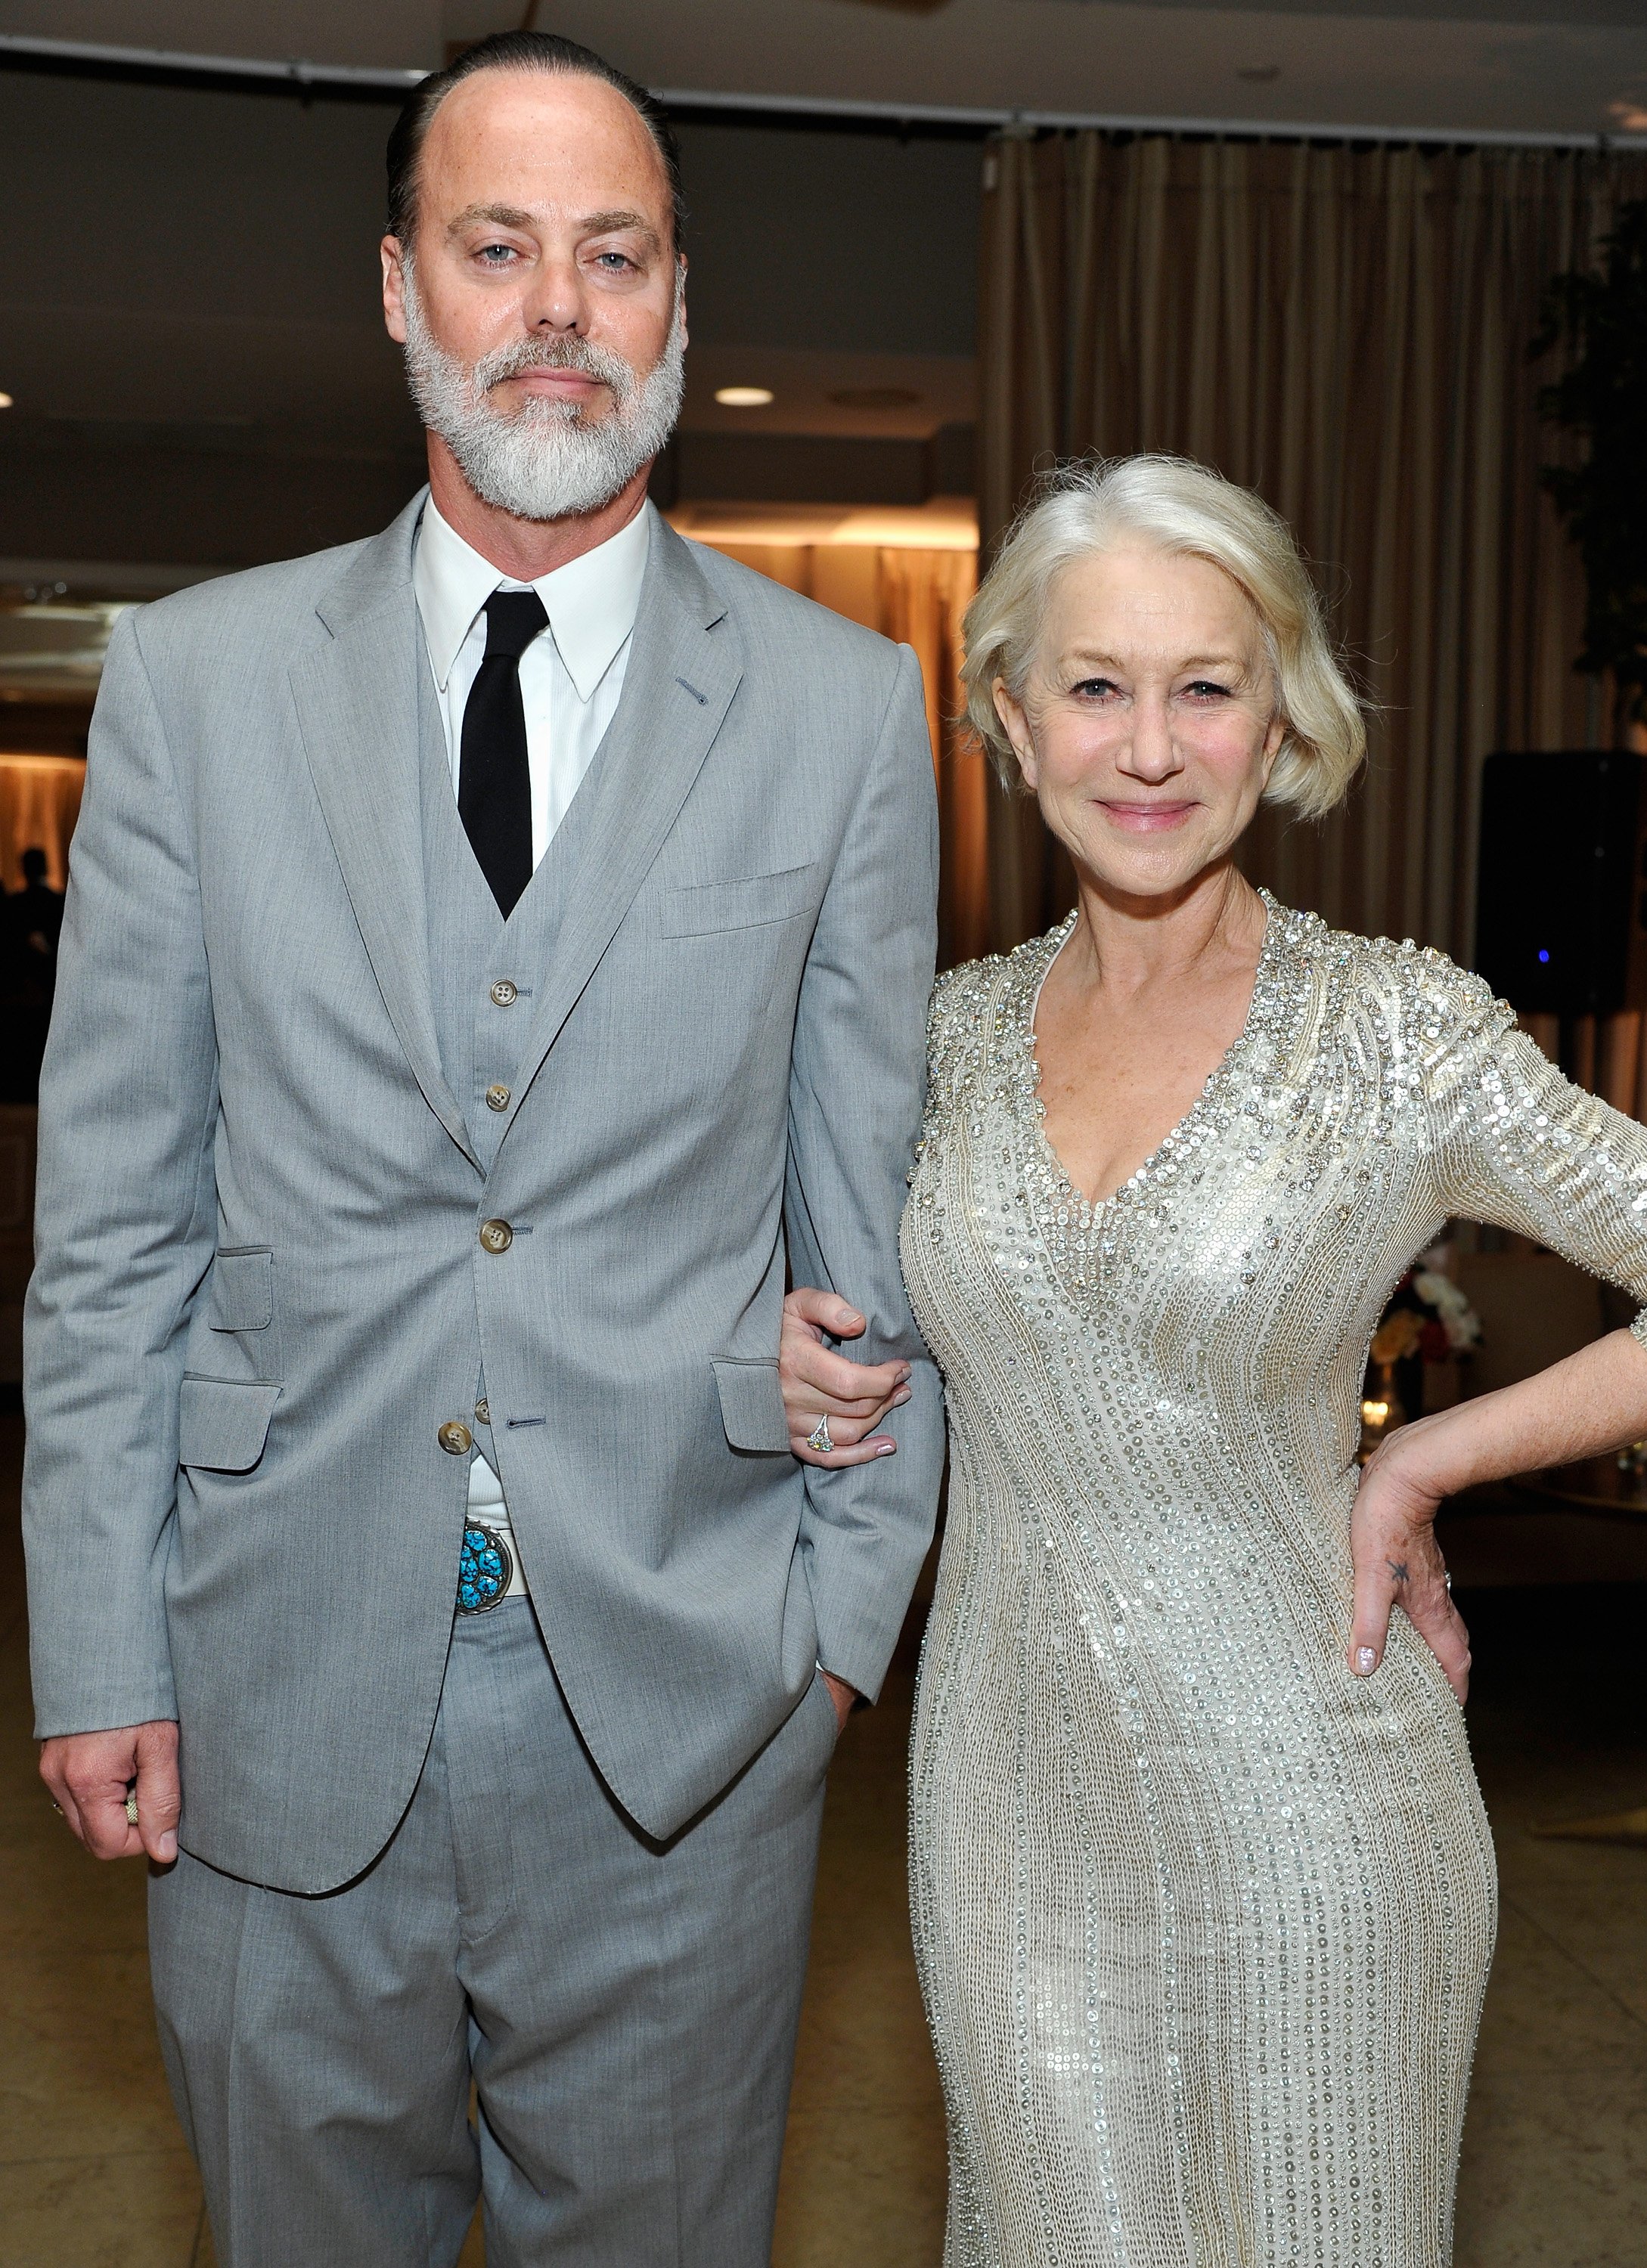 Rio Hackford and Helen Mirren at the Weinstein Company & Netflix's SAG after-party on January 30, 2016, in West Hollywood, California. | Source: John Sciulli/Getty Images 